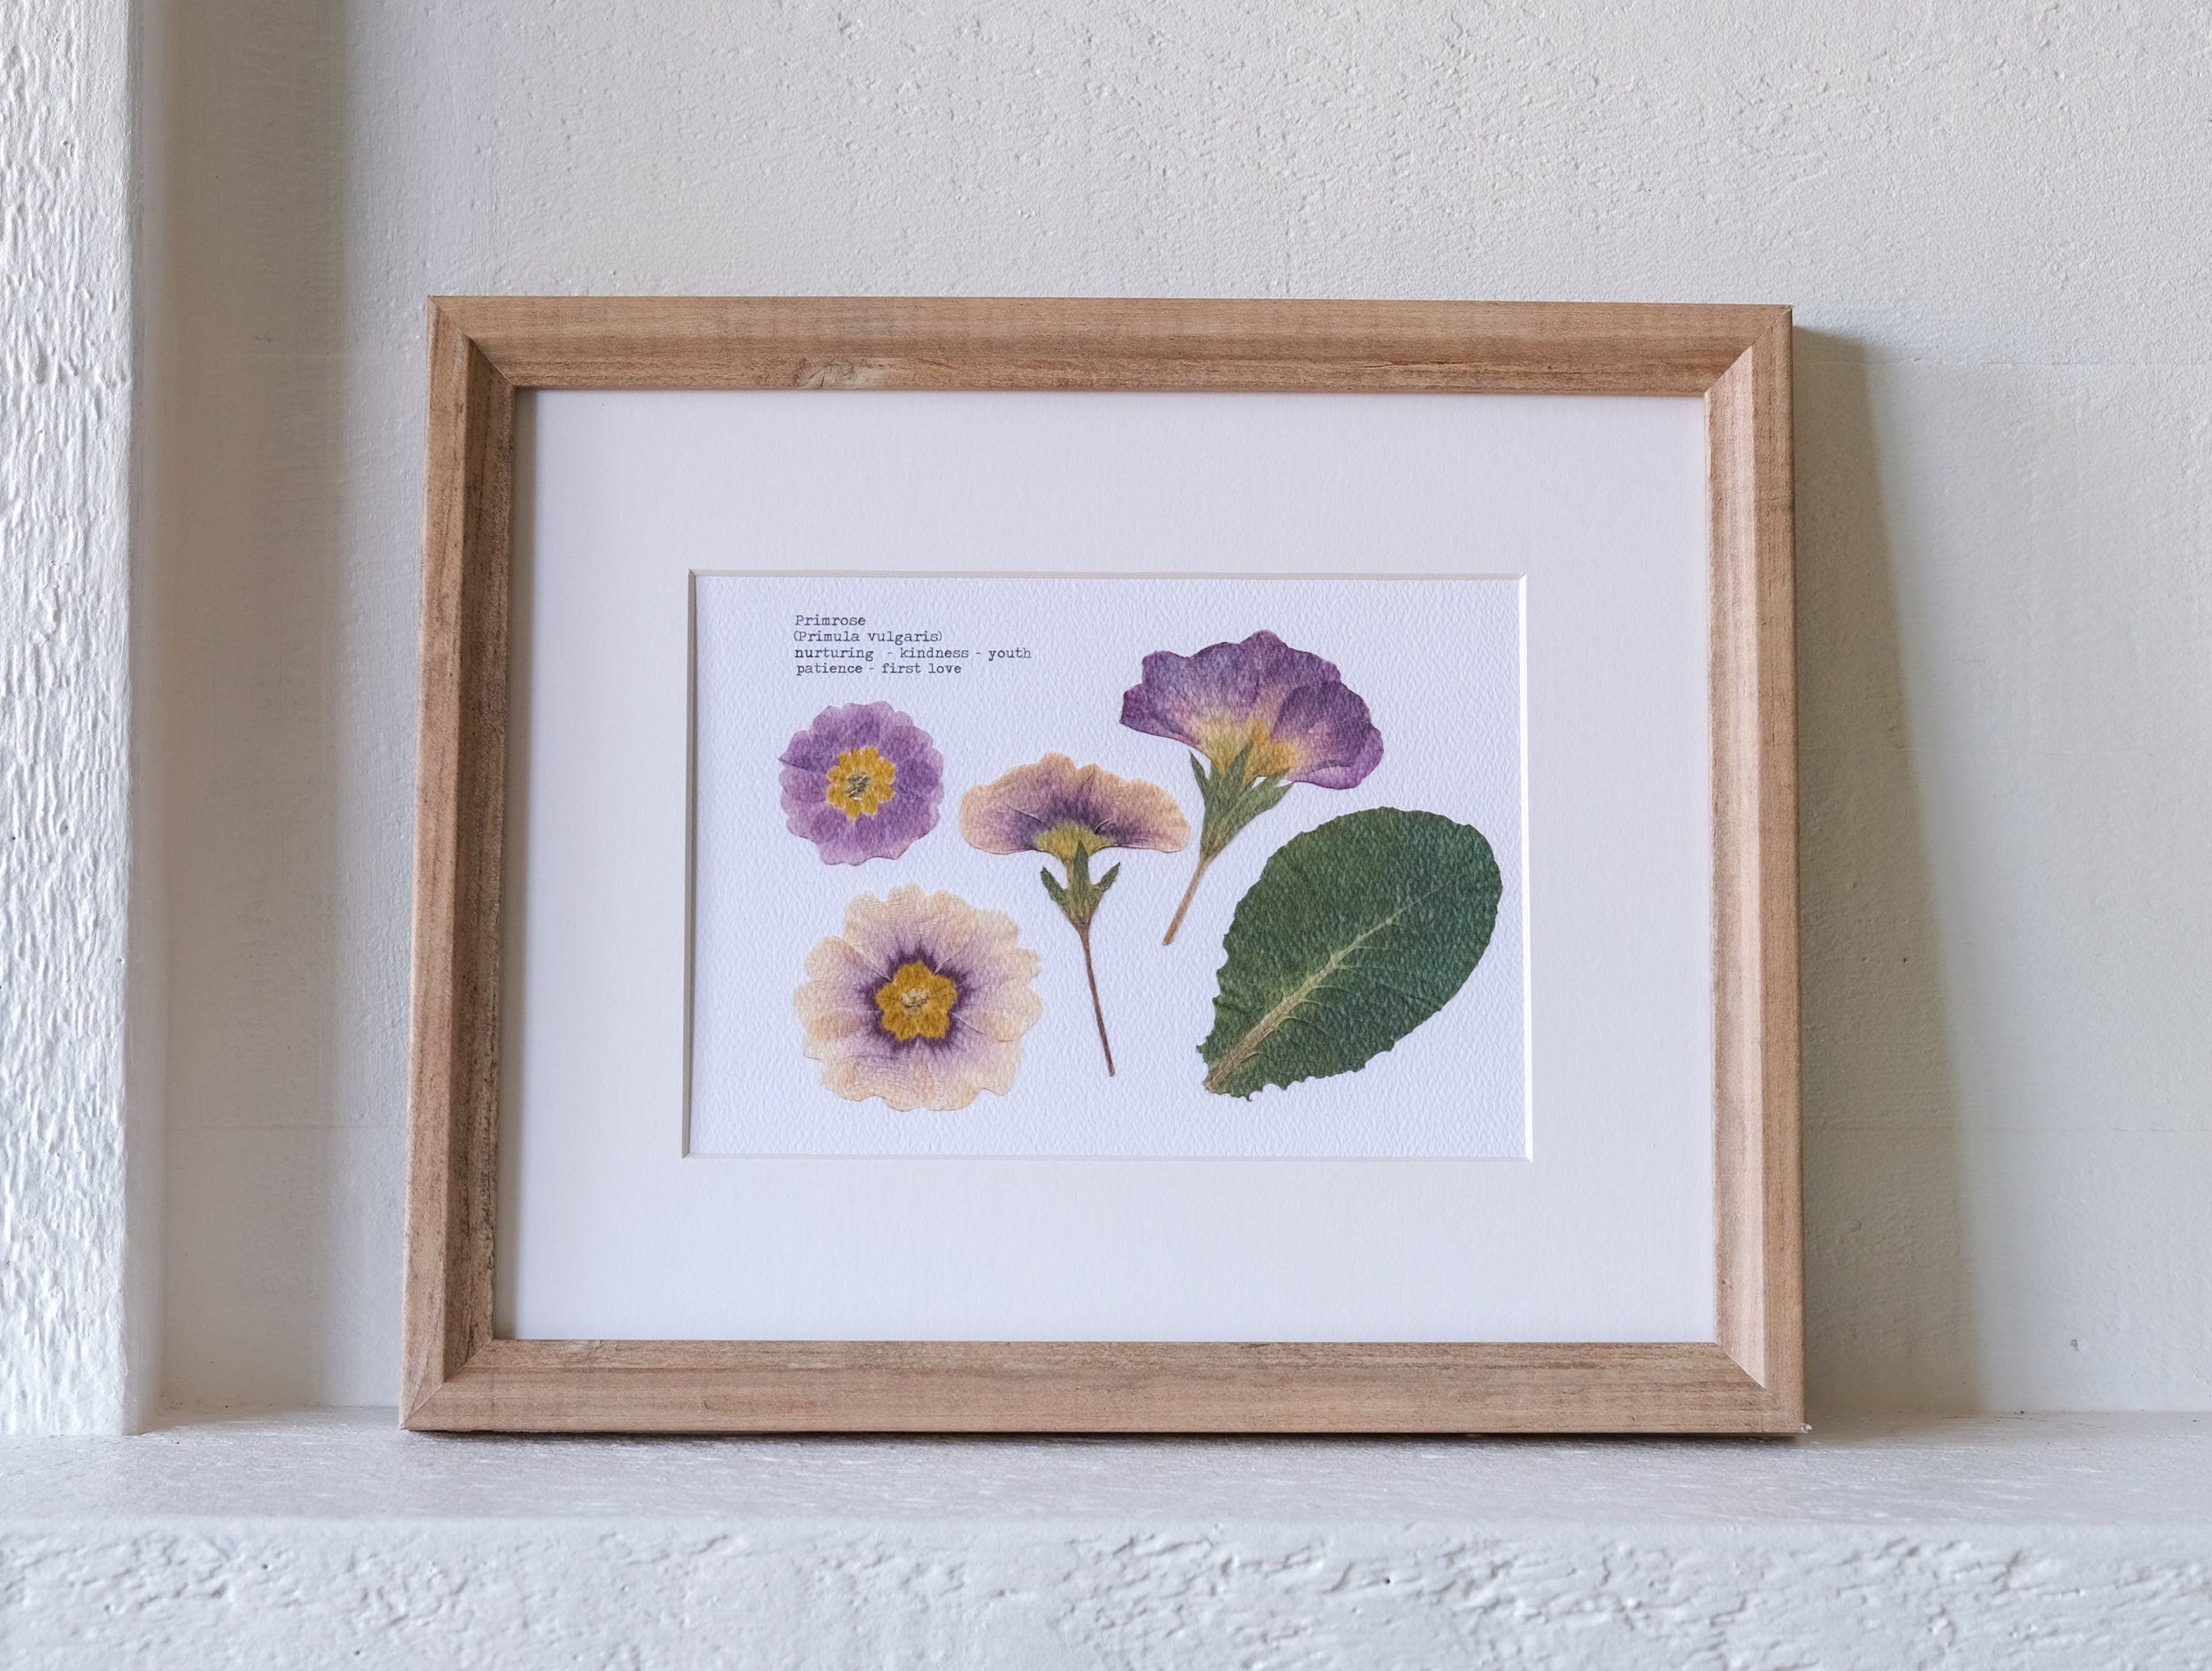 My new oshibana -> pressed flowers frame with real dried flowers and  plants. Yellow primroses, pink columbines, daisies, sweet peas flowers and  a lot of dried leaves and foliage. : r/crafts